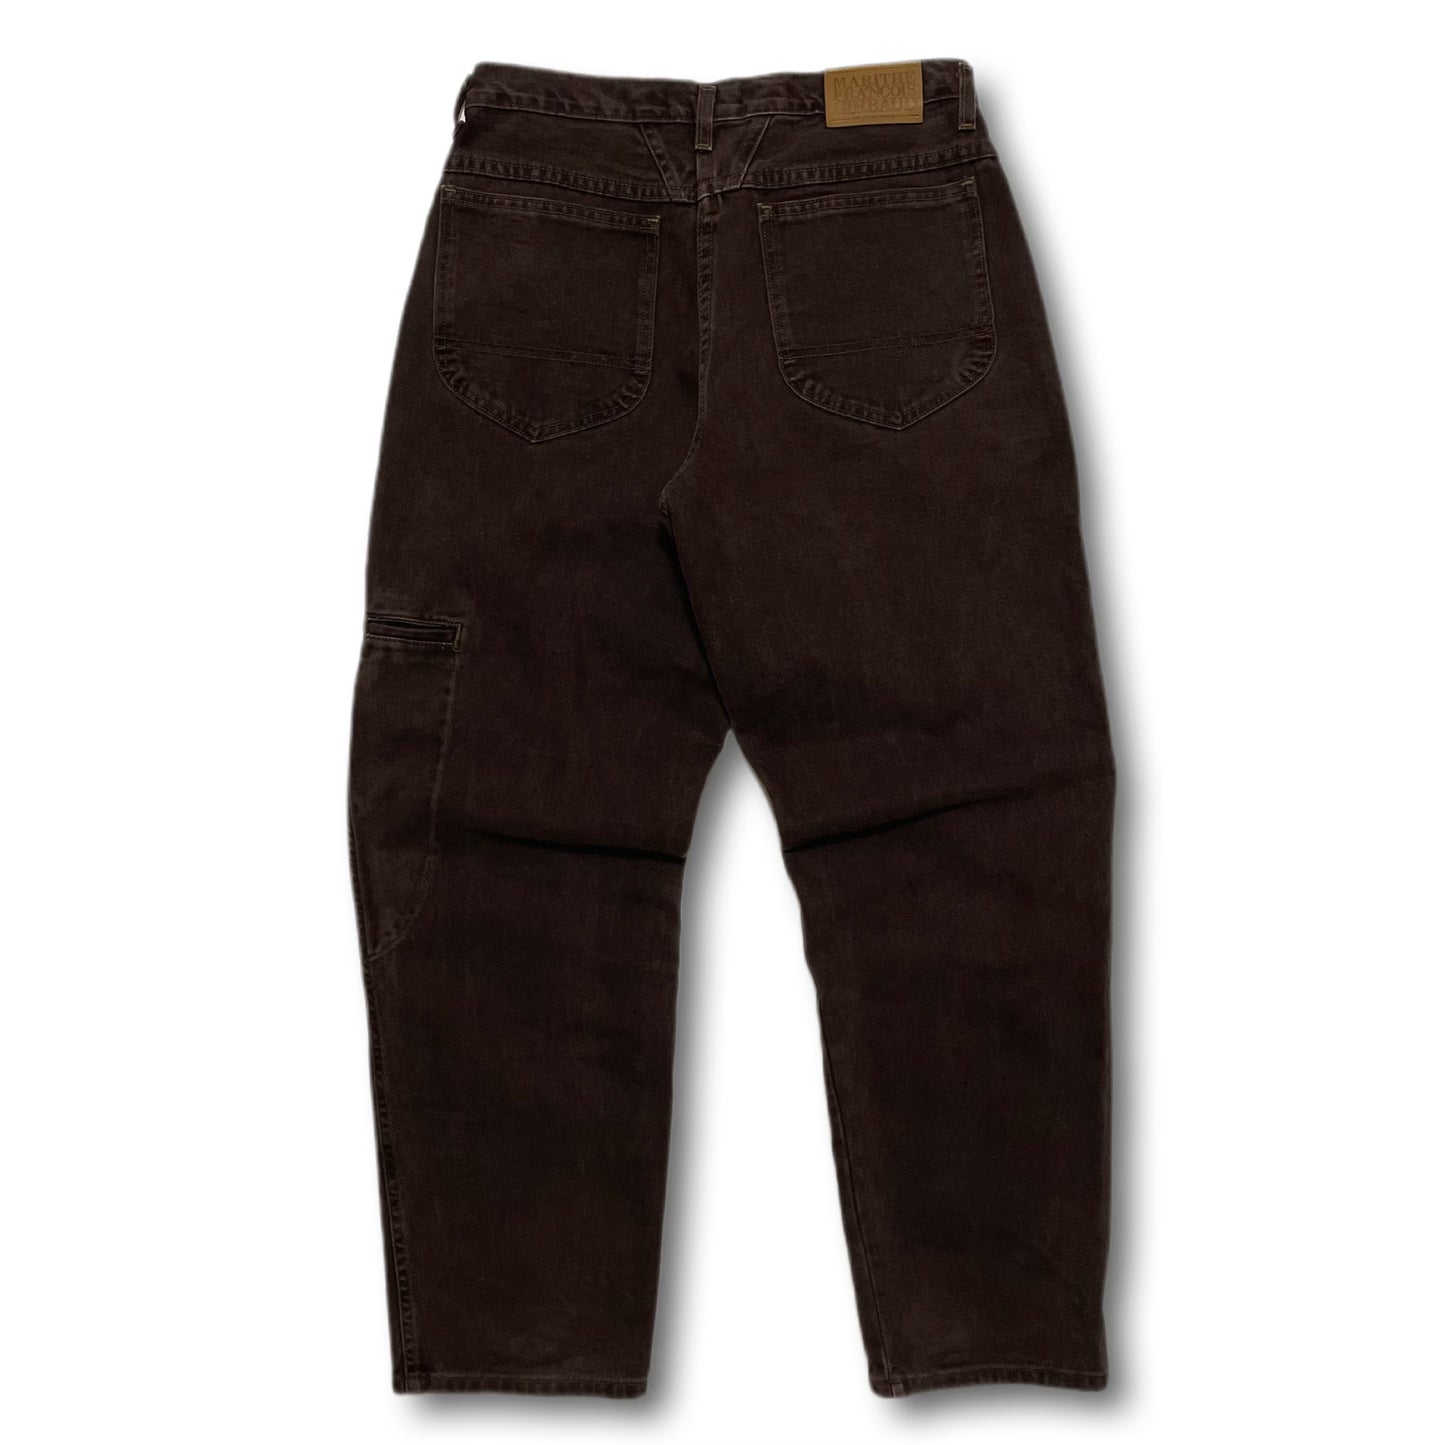 Marithé + François Girbaud Stone Washed Jean